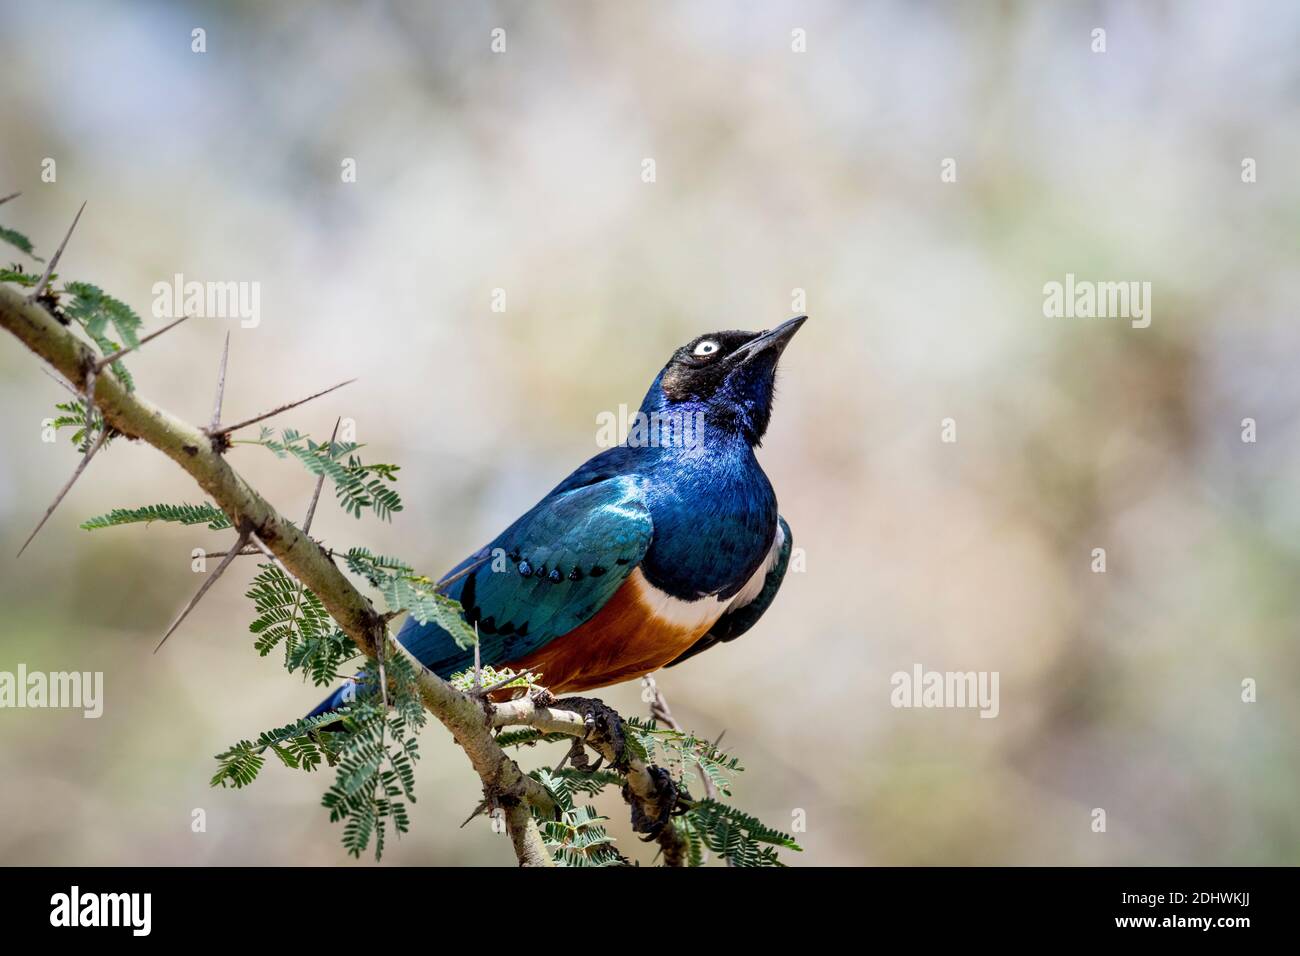 Superb Starling (Lamprotornis superbus), an iridescent, iconic Kenyan bird, perched on thorny Fever Tree branch, Narok County, Kenya, Africa. Stock Photo